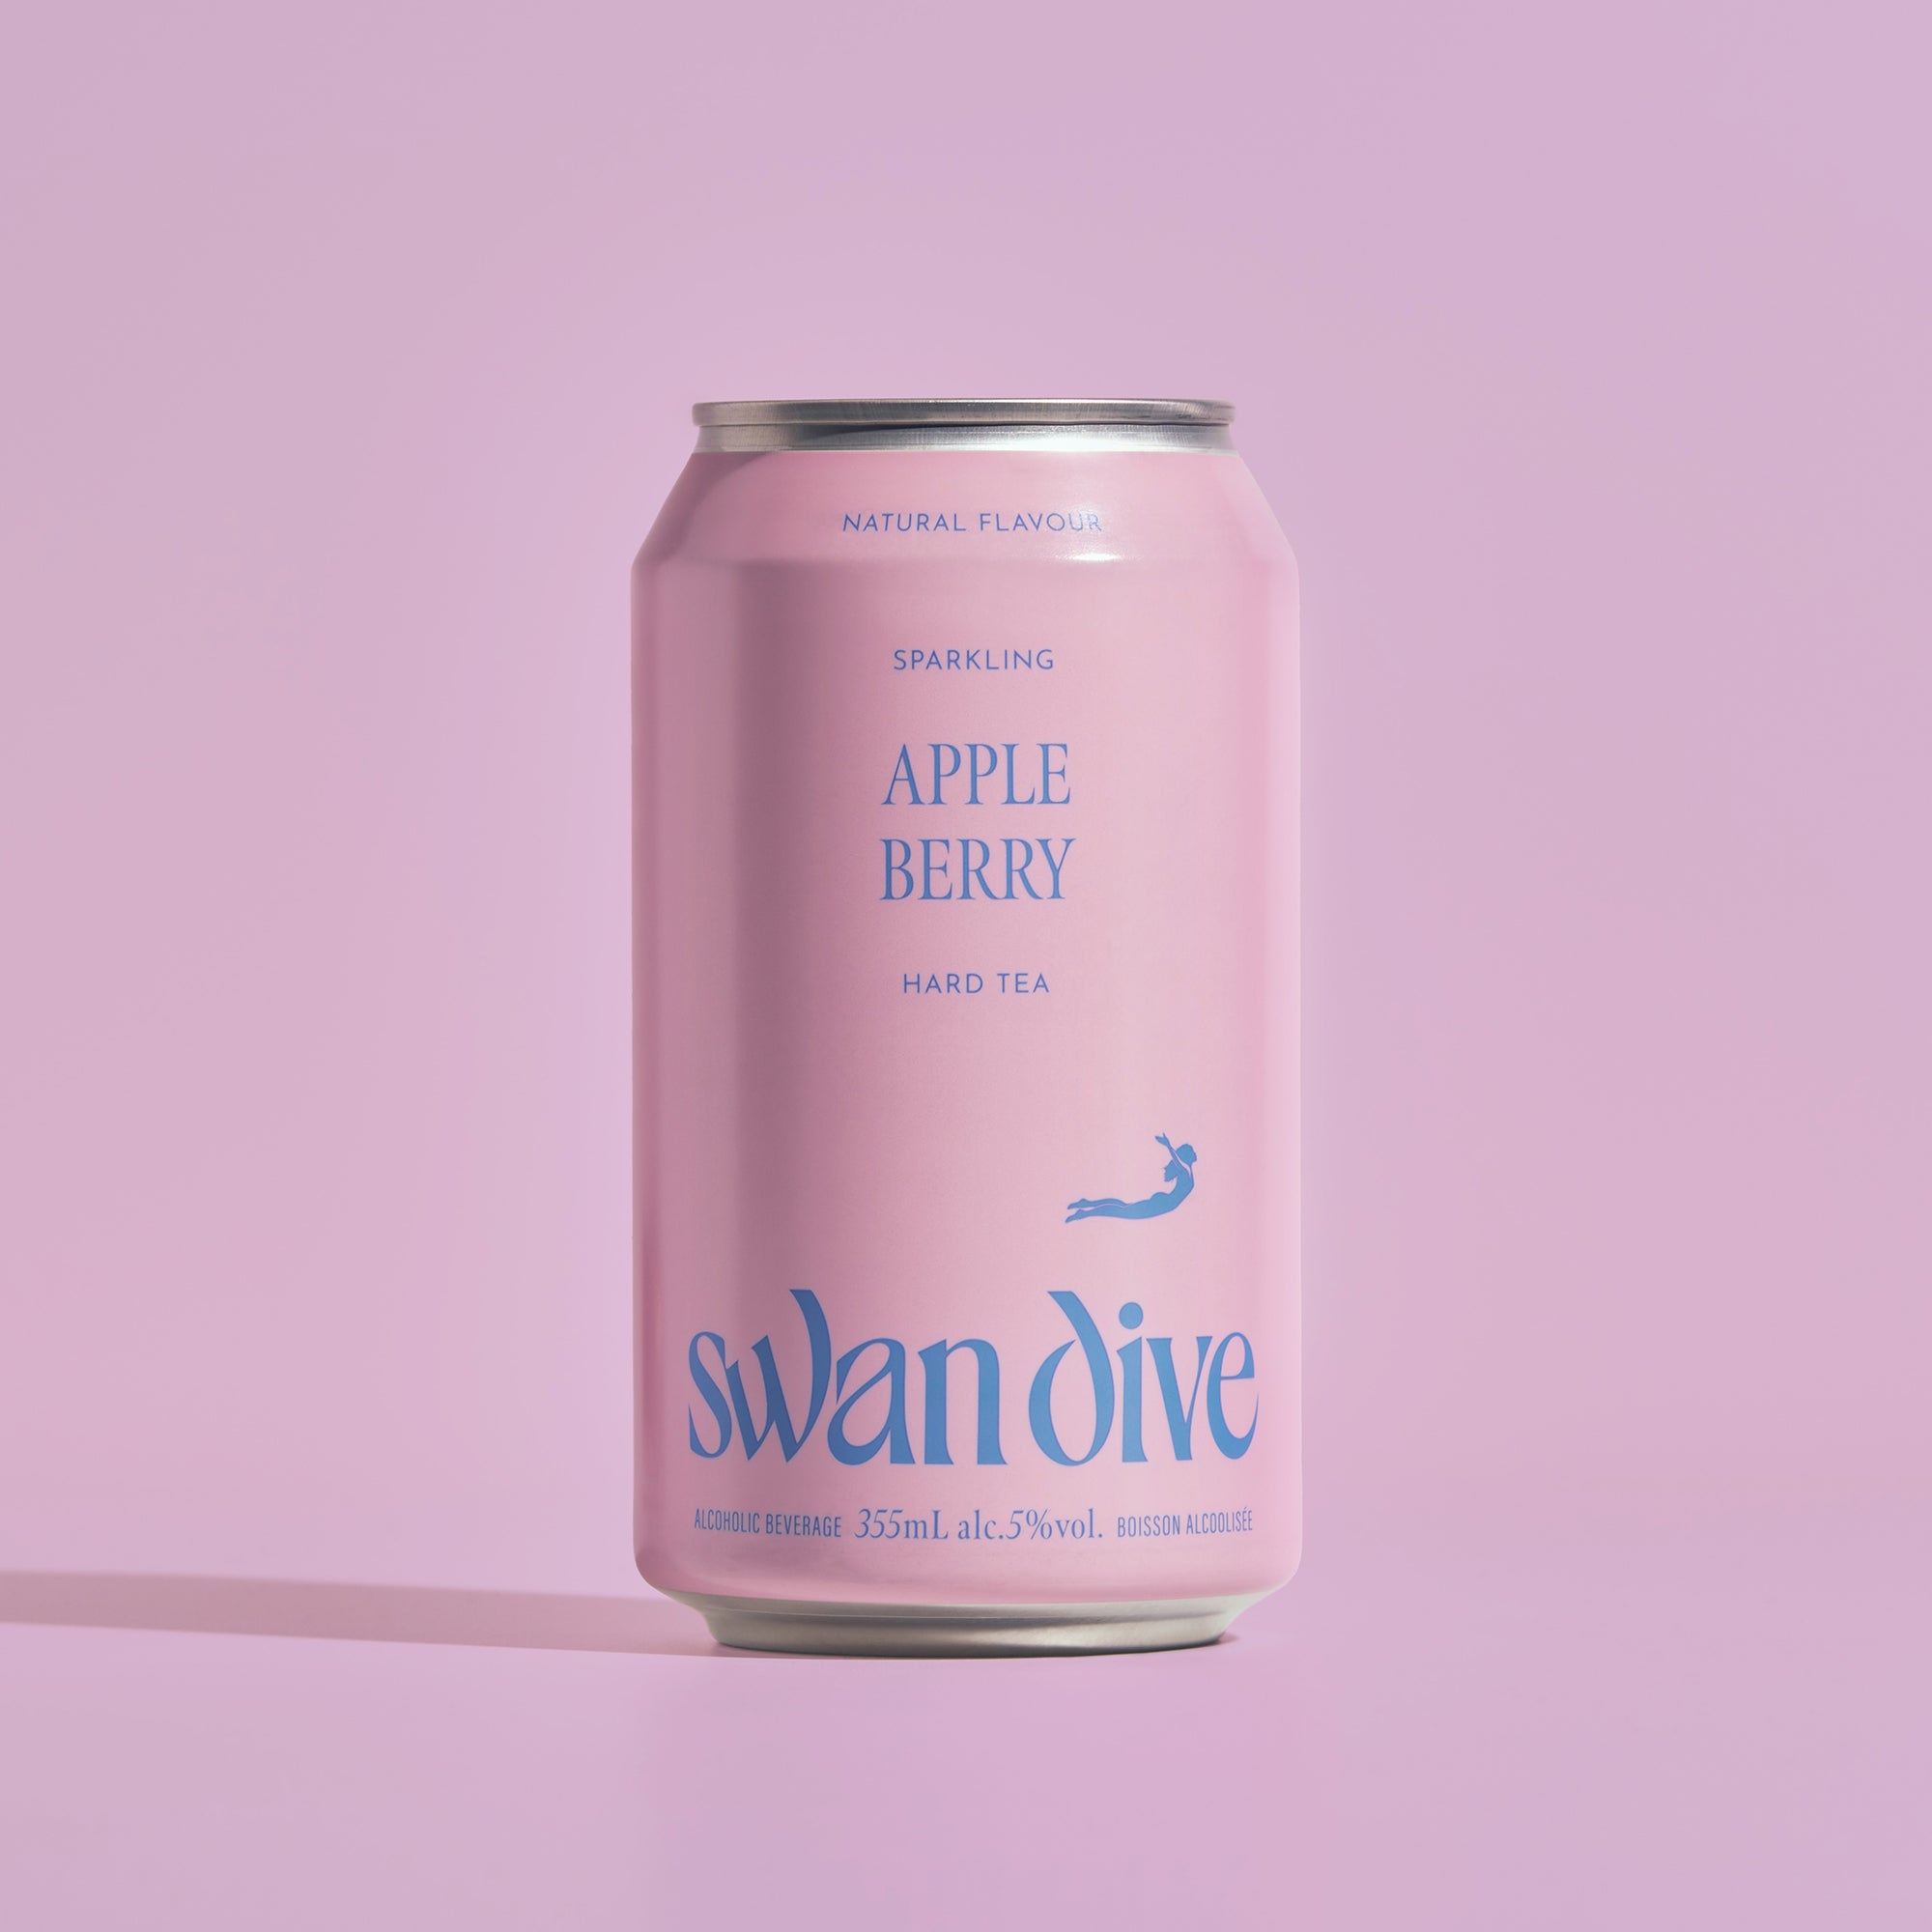 swan dive apple berry sparkling hard tea can